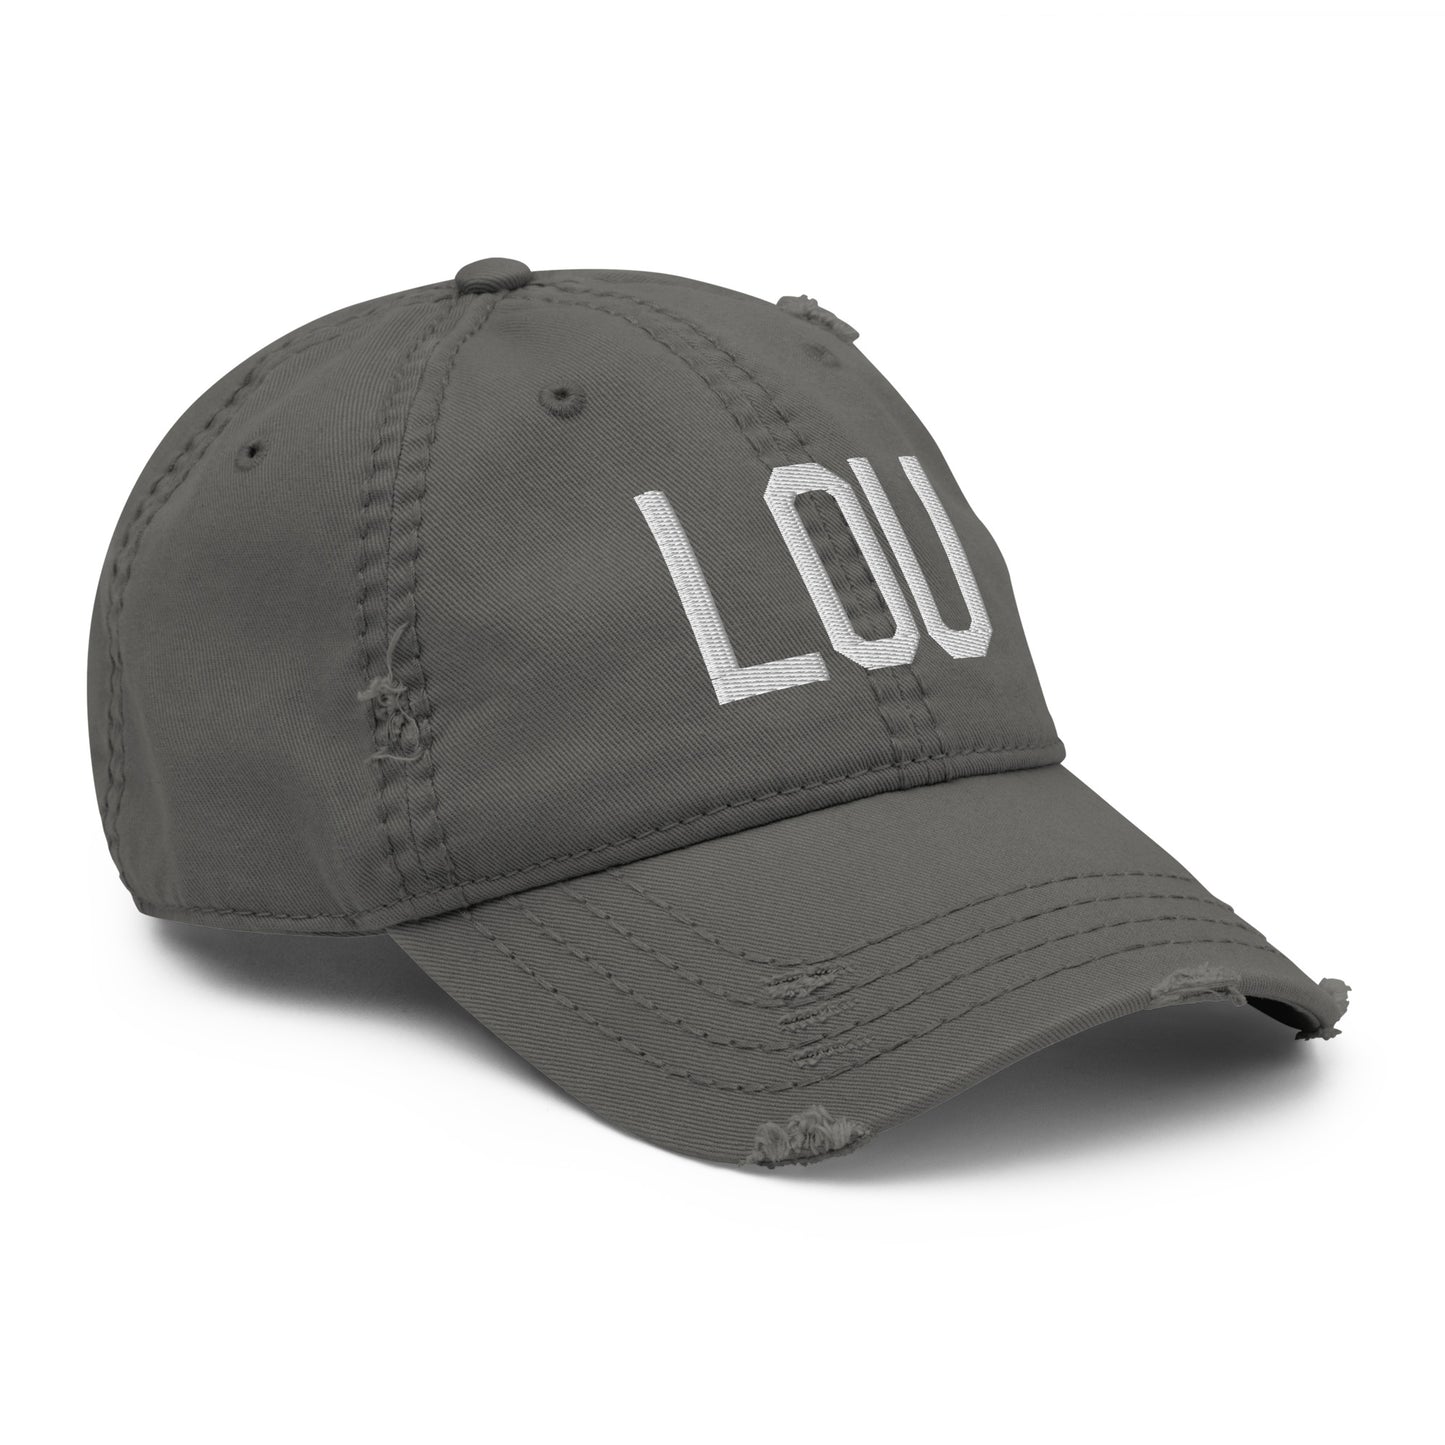 Airport Code Distressed Hat - White • LOU Louisville • YHM Designs - Image 17